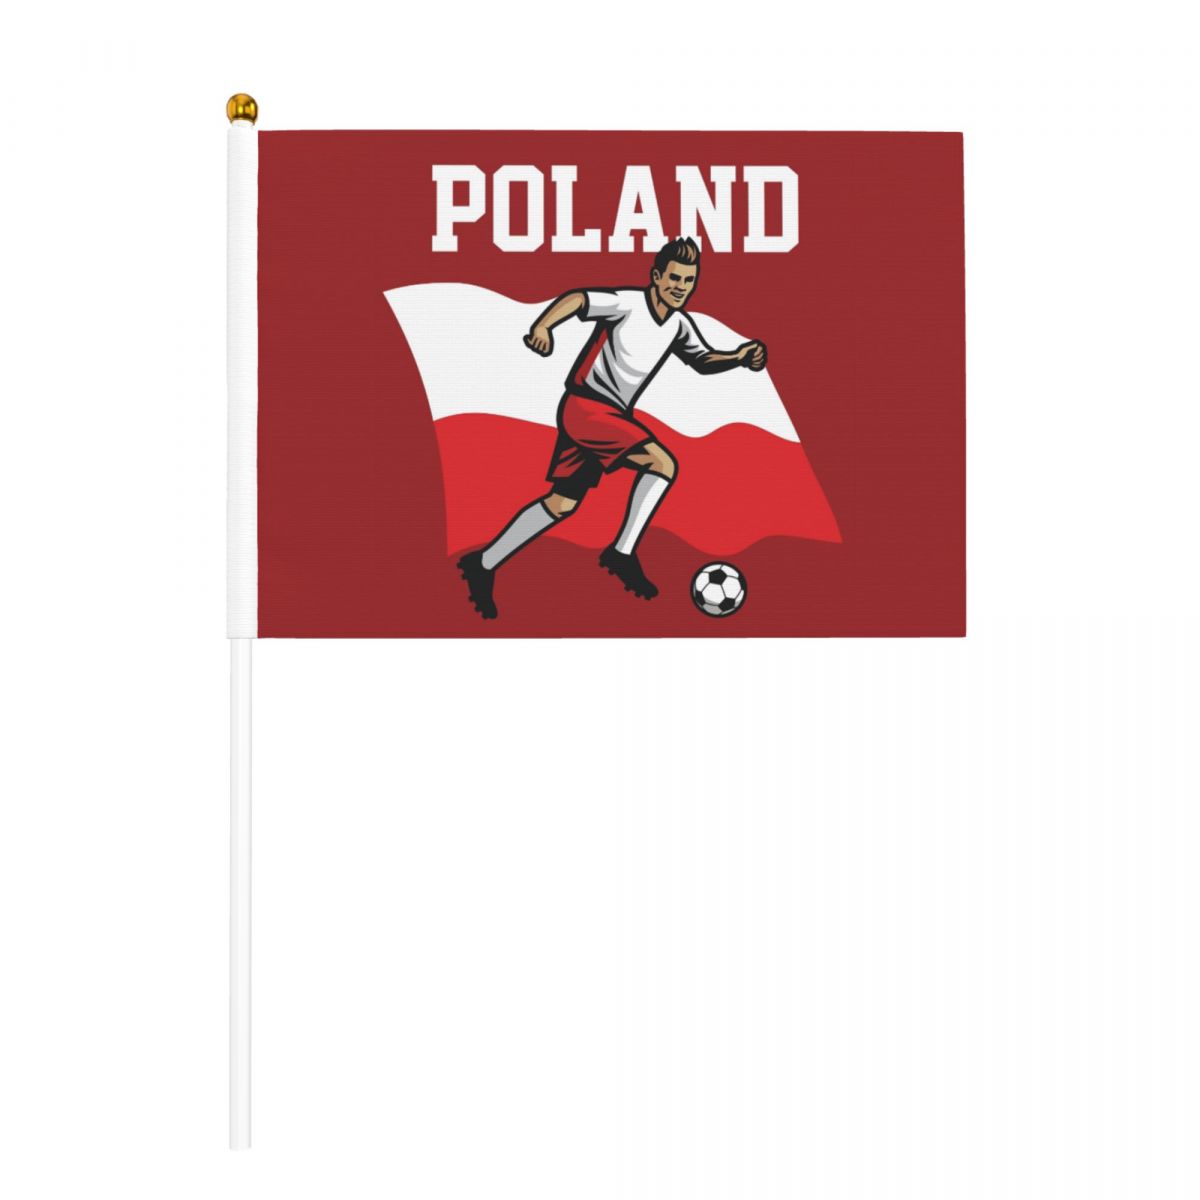 Poland Soccer Player Hand Held Fade Resistant Mini Flag